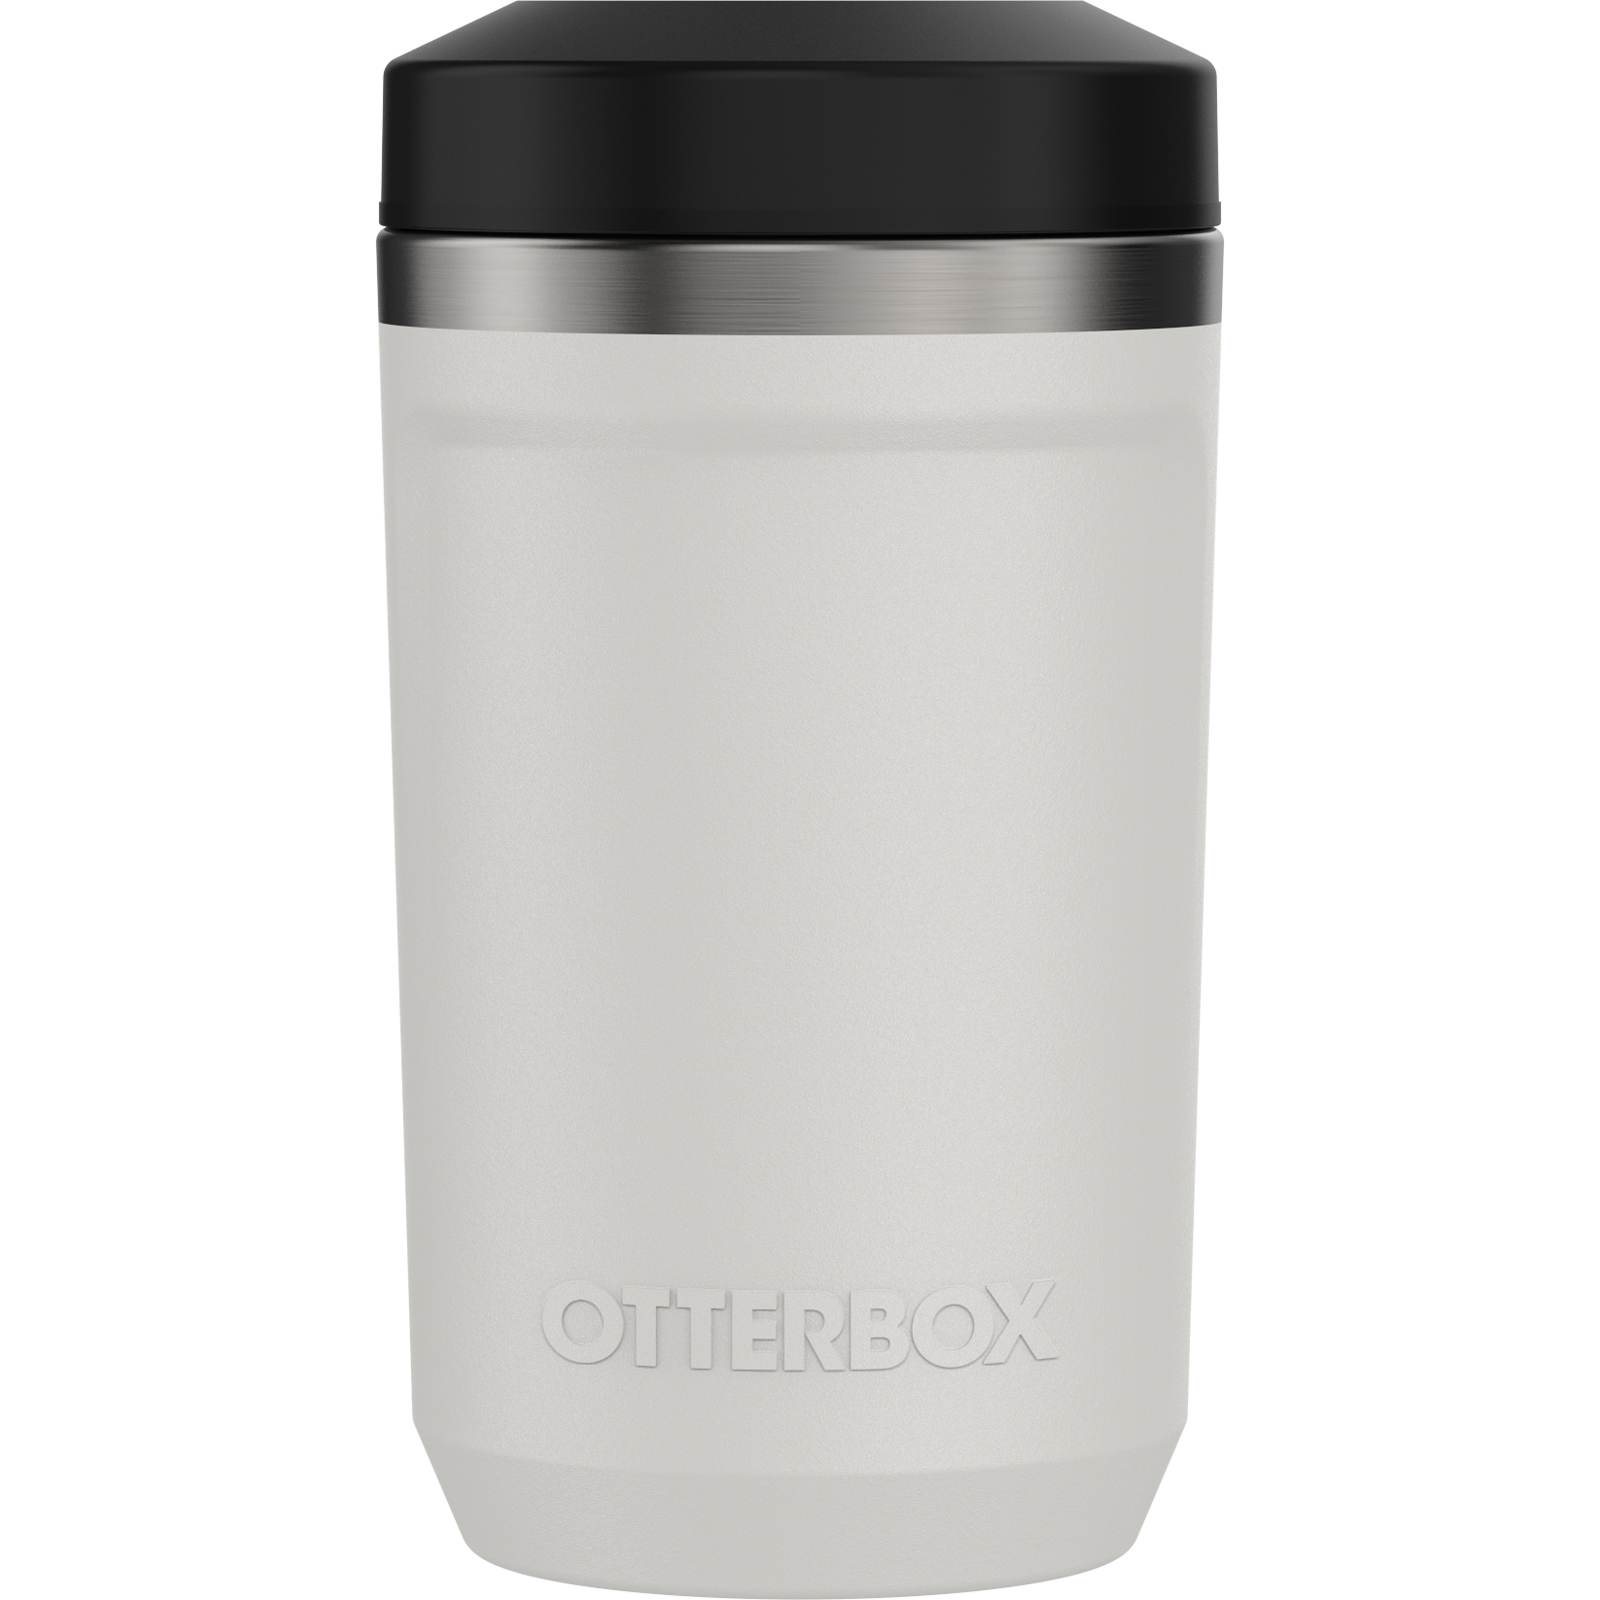 https://www.otterbox.com/on/demandware.static/-/Sites-masterCatalog/default/dwb90c303c/productimages/dis/outdoor/elevation-can-cooler/elevation-can-cooler-ice-cap-1.jpg